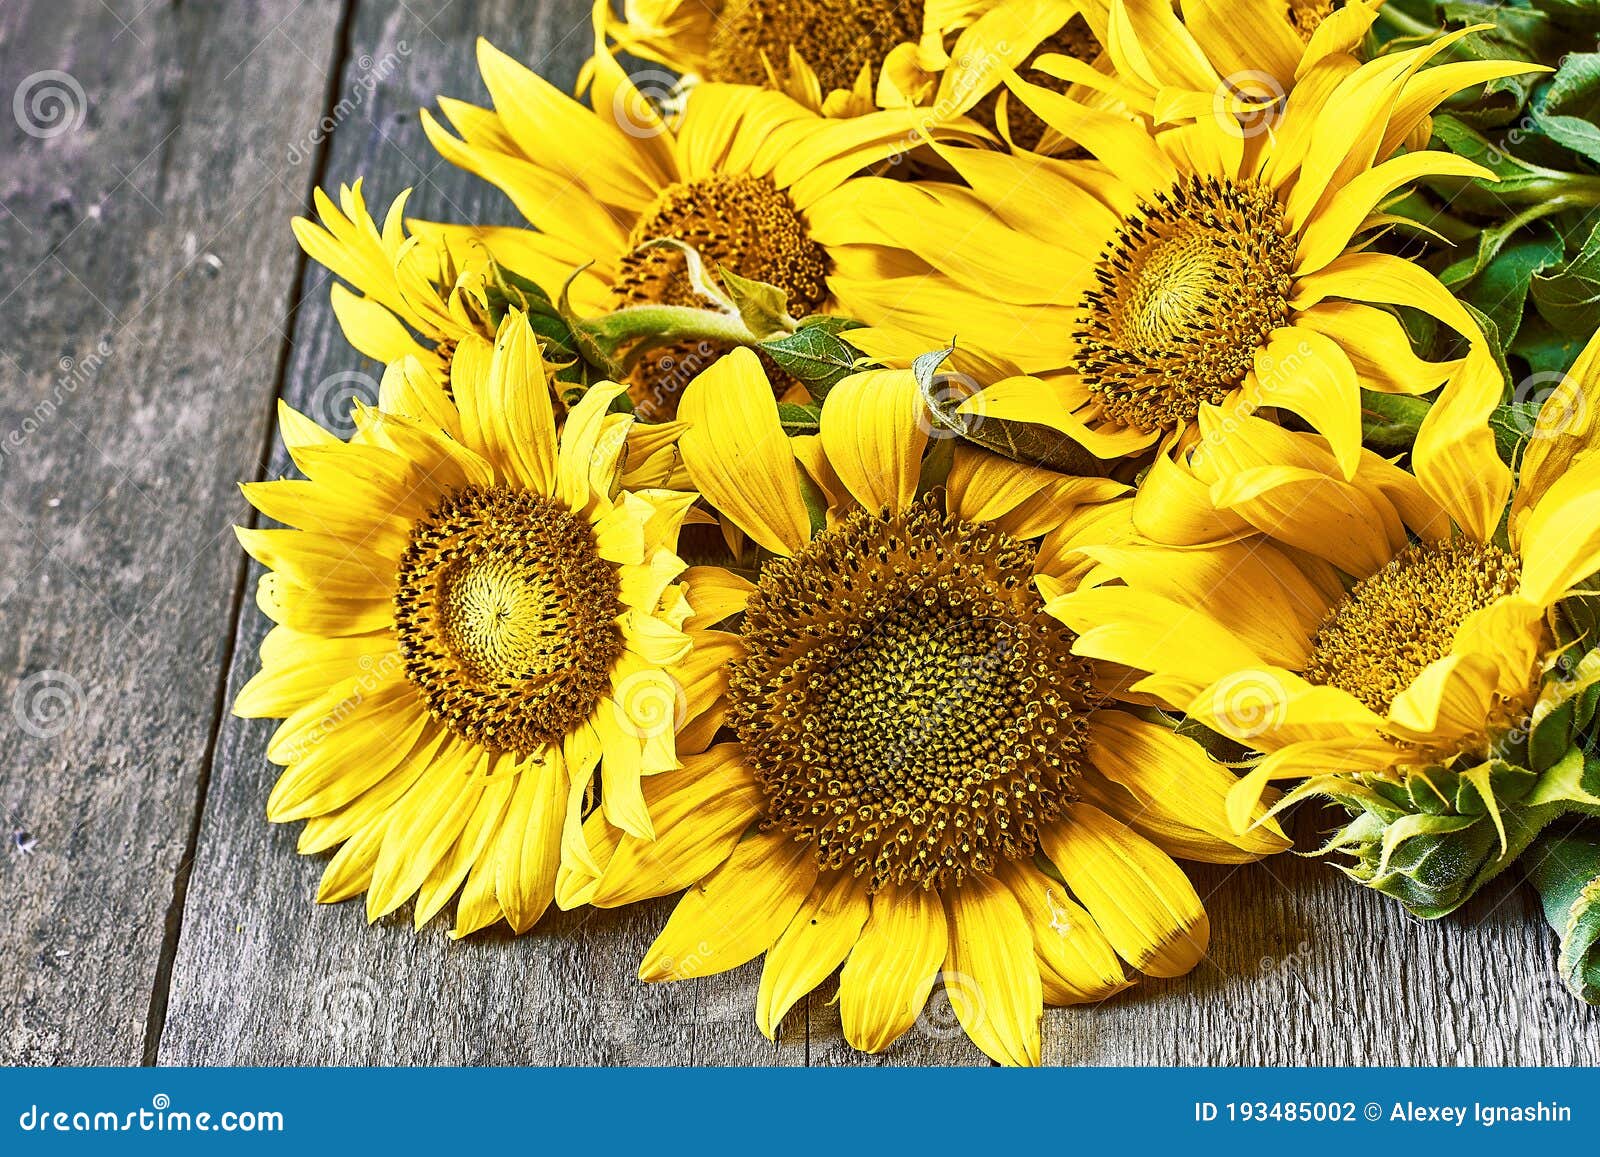 A bouquet of sunflowers as a sign of the end of summer